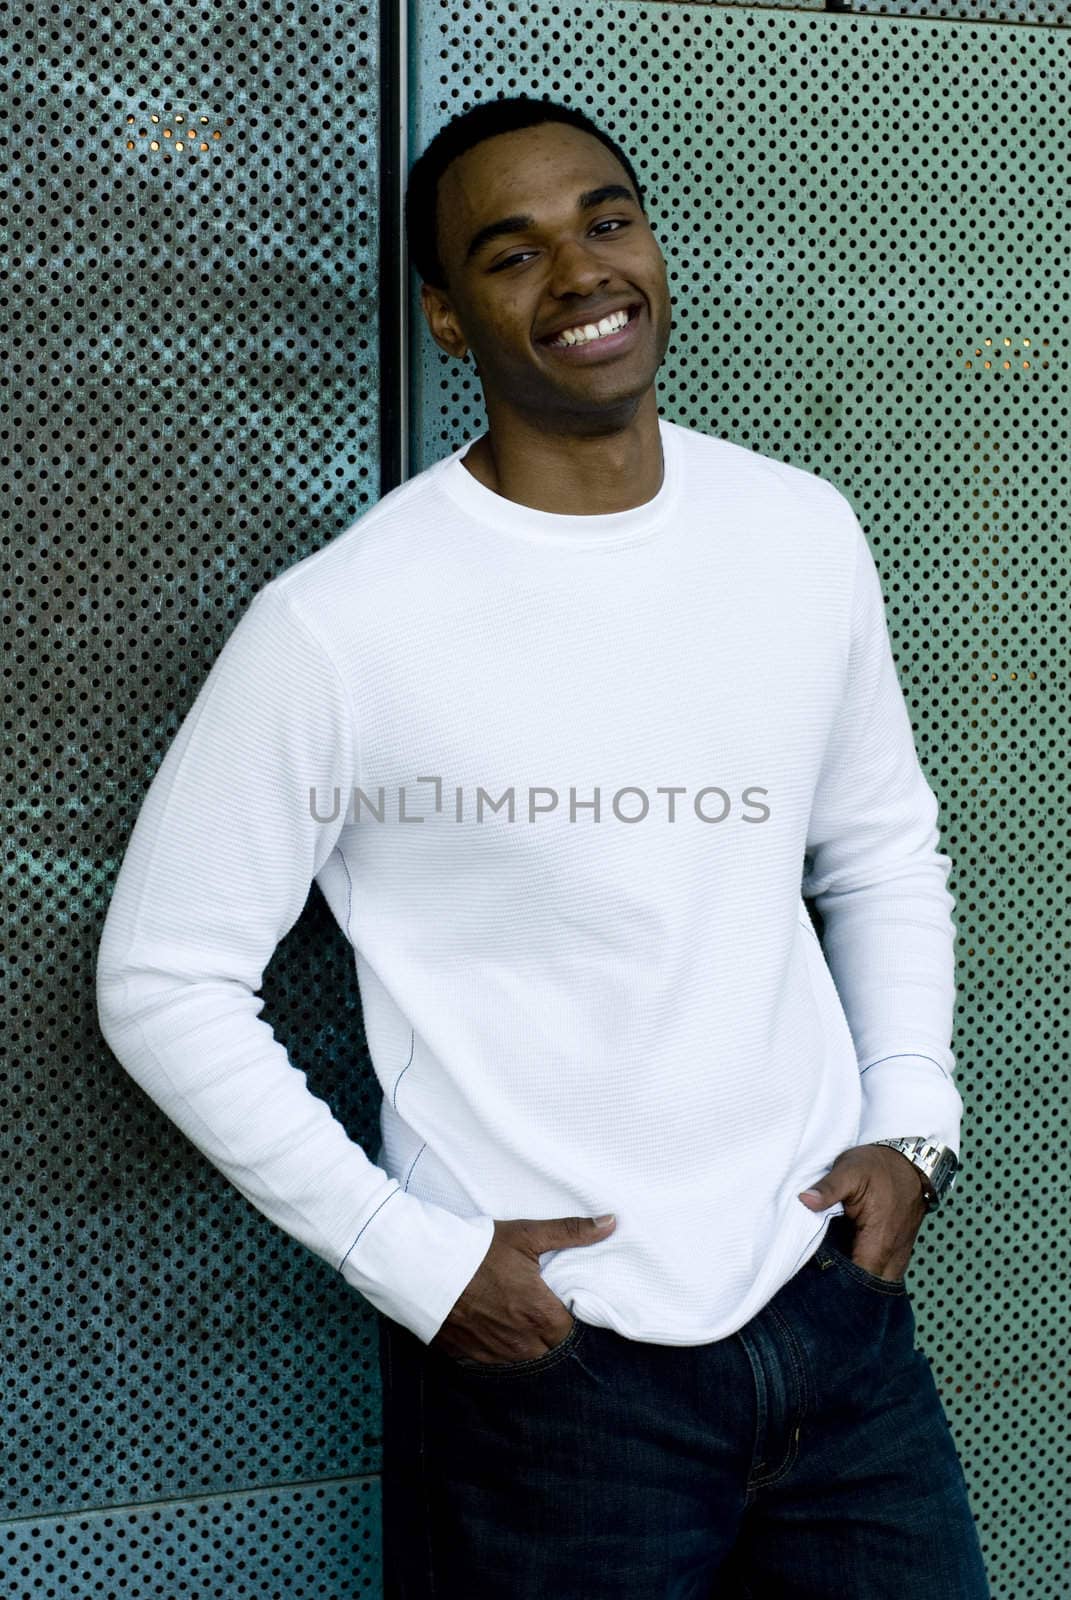 Attractive young African American male playing posing in a white t-shirt and jeans against a mesh green wall.